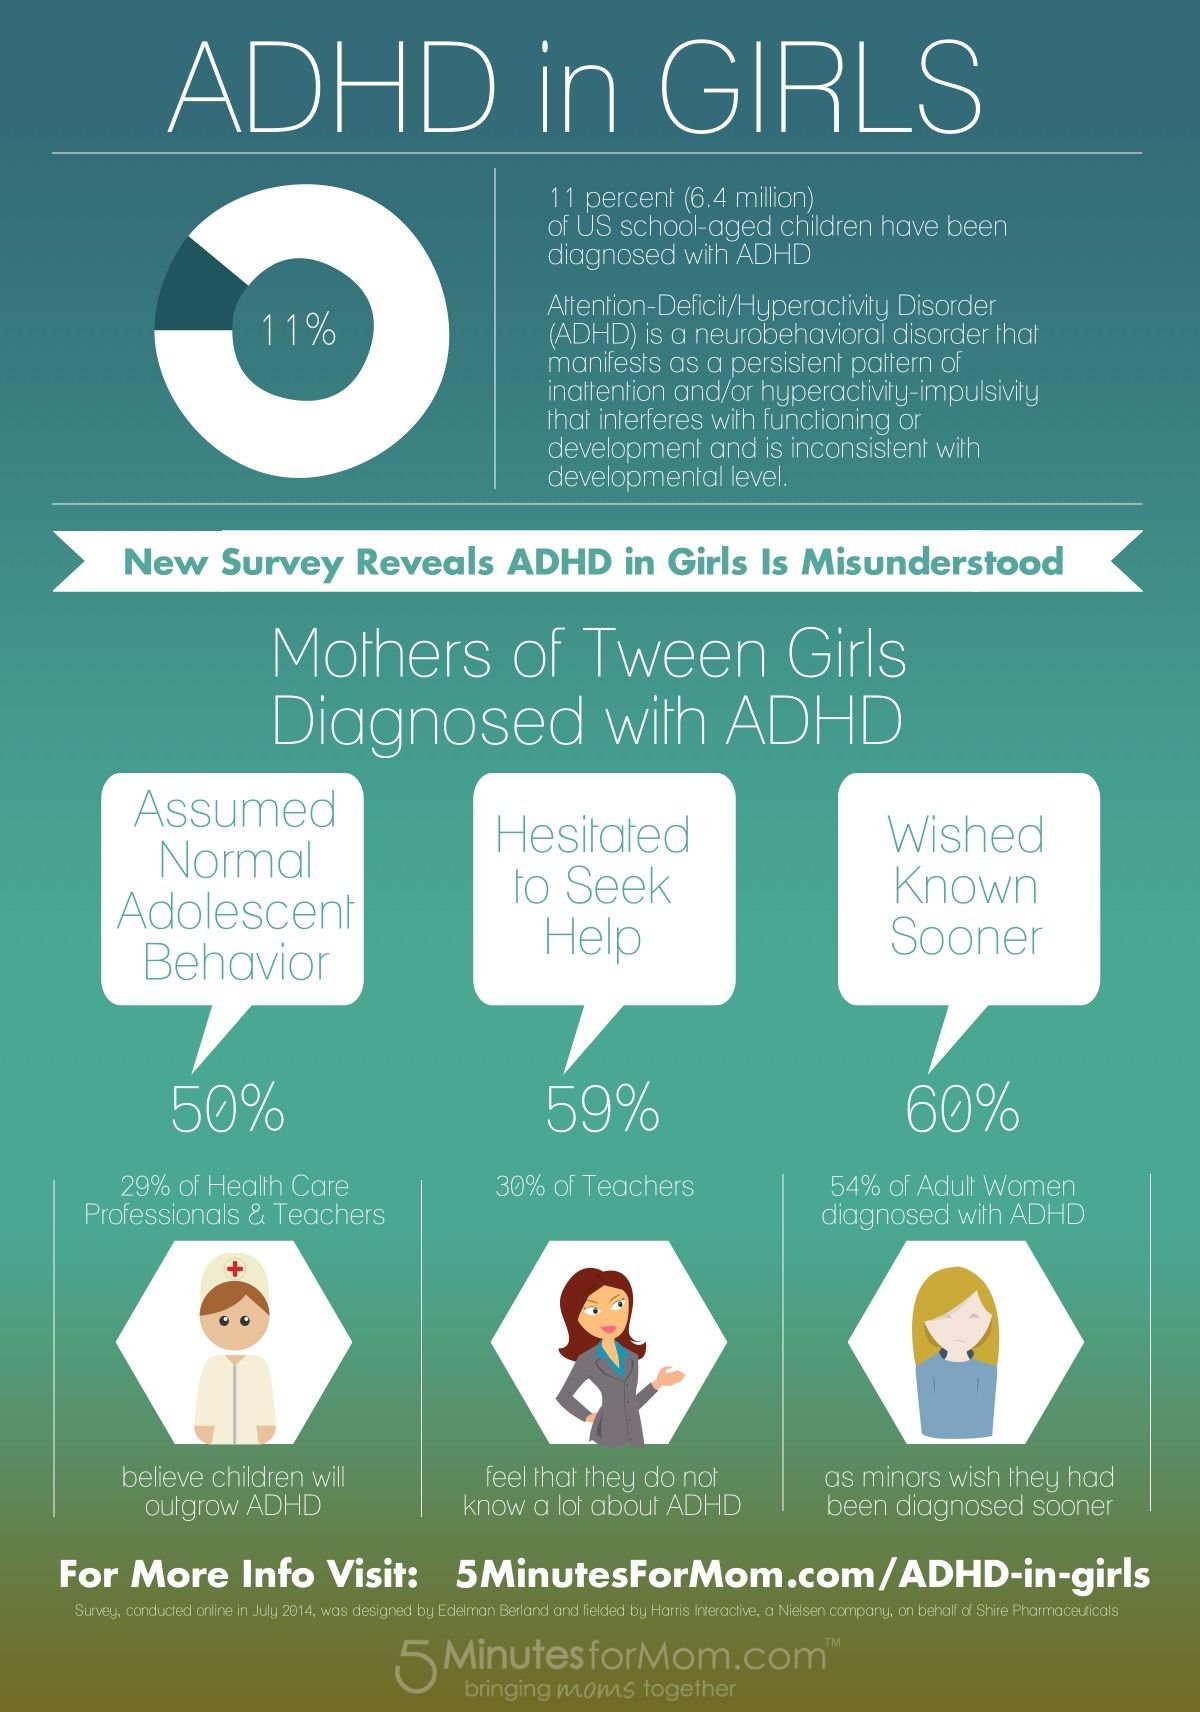 ADHD in Girls - Are You Missing The Symptoms?